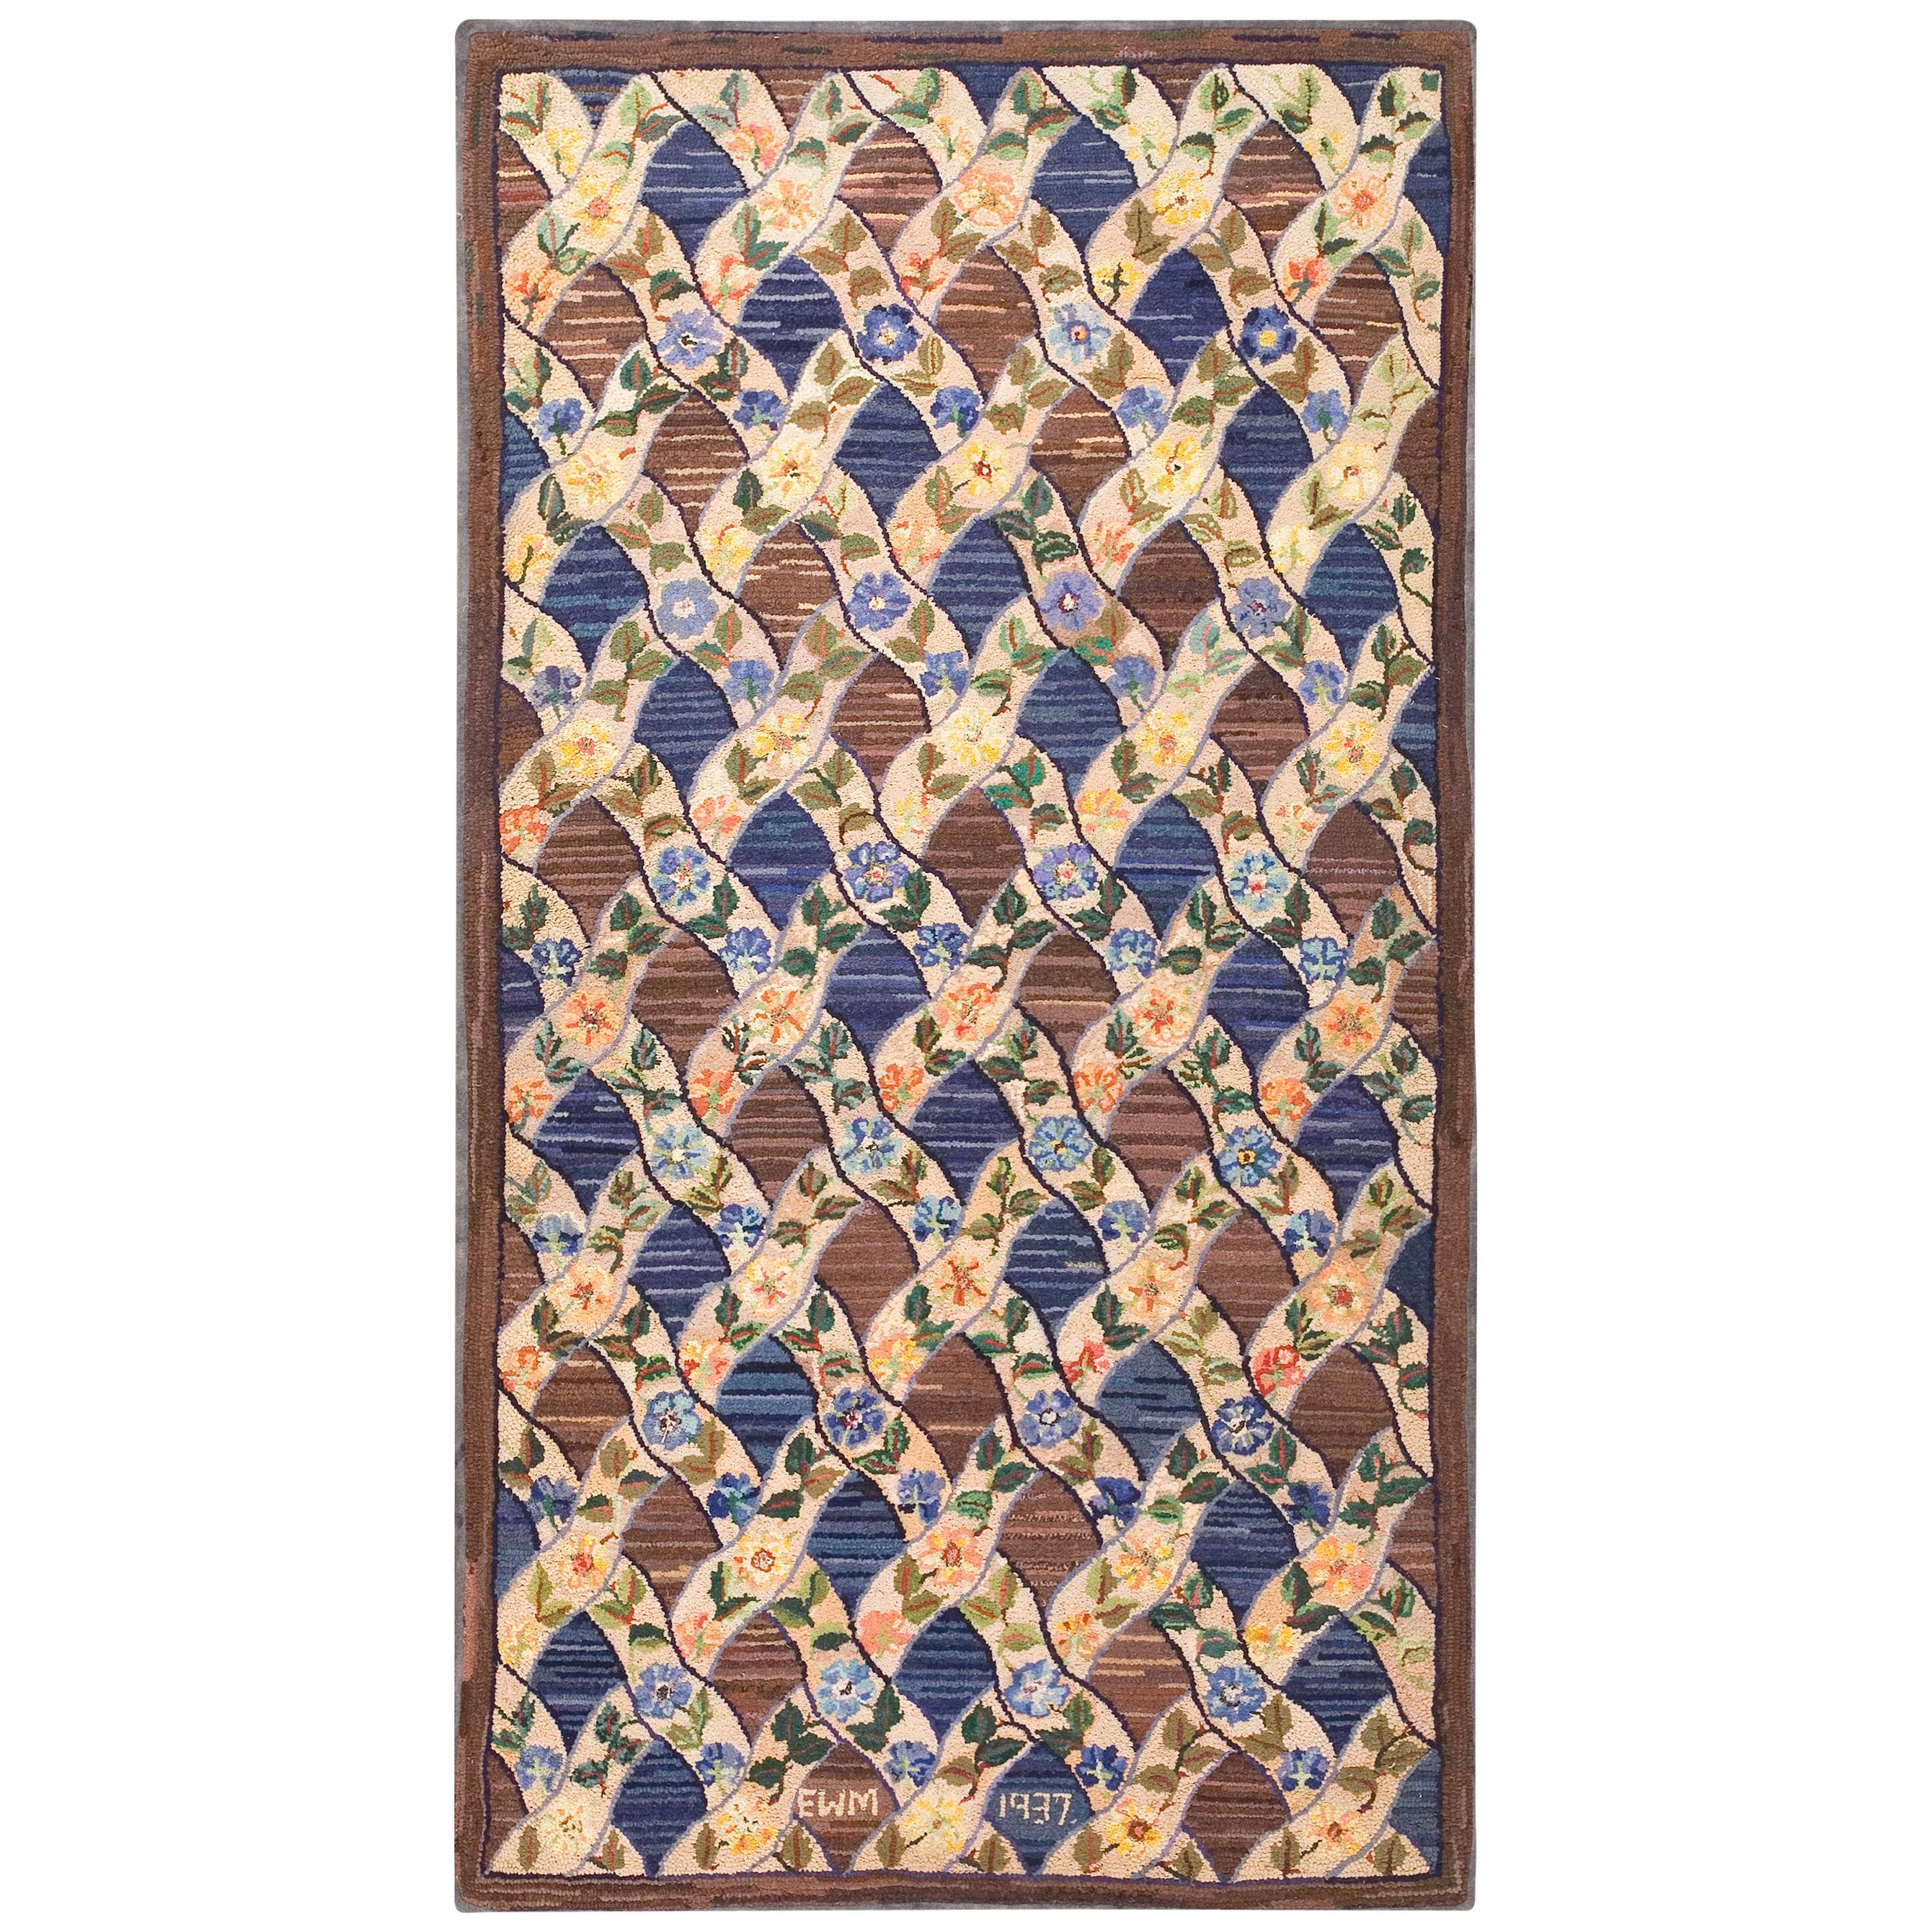 Antique American Hooked Rug 3' 6" x 6' 4" For Sale